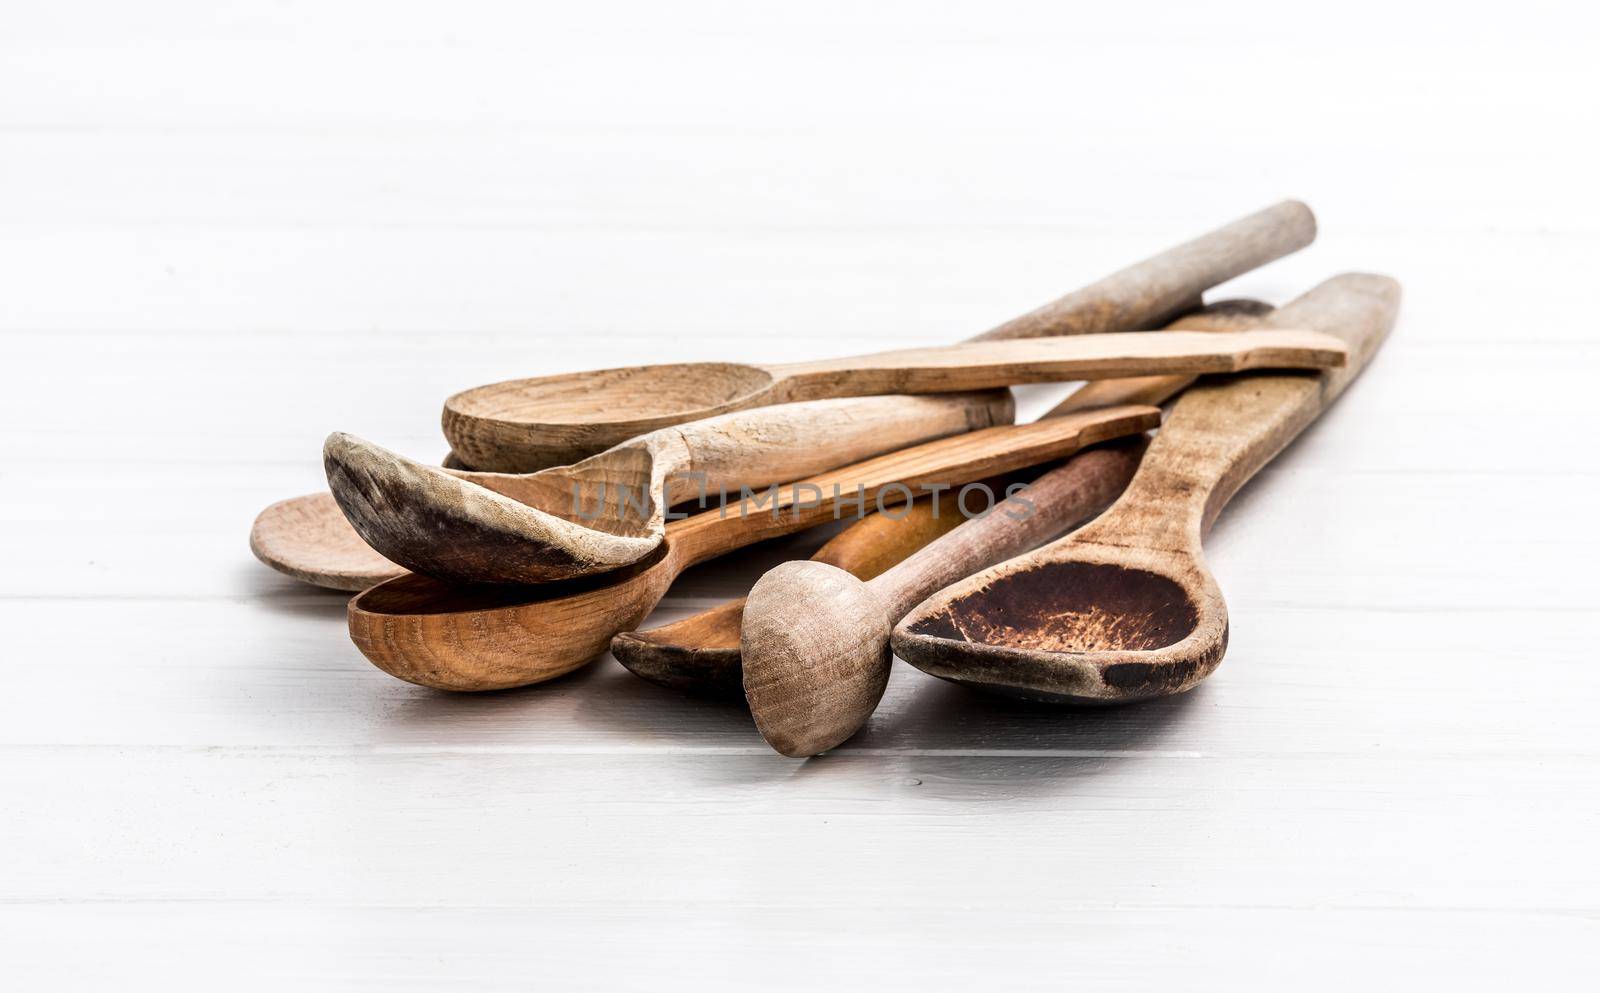 Bunch of wooden spoons on white background by tan4ikk1